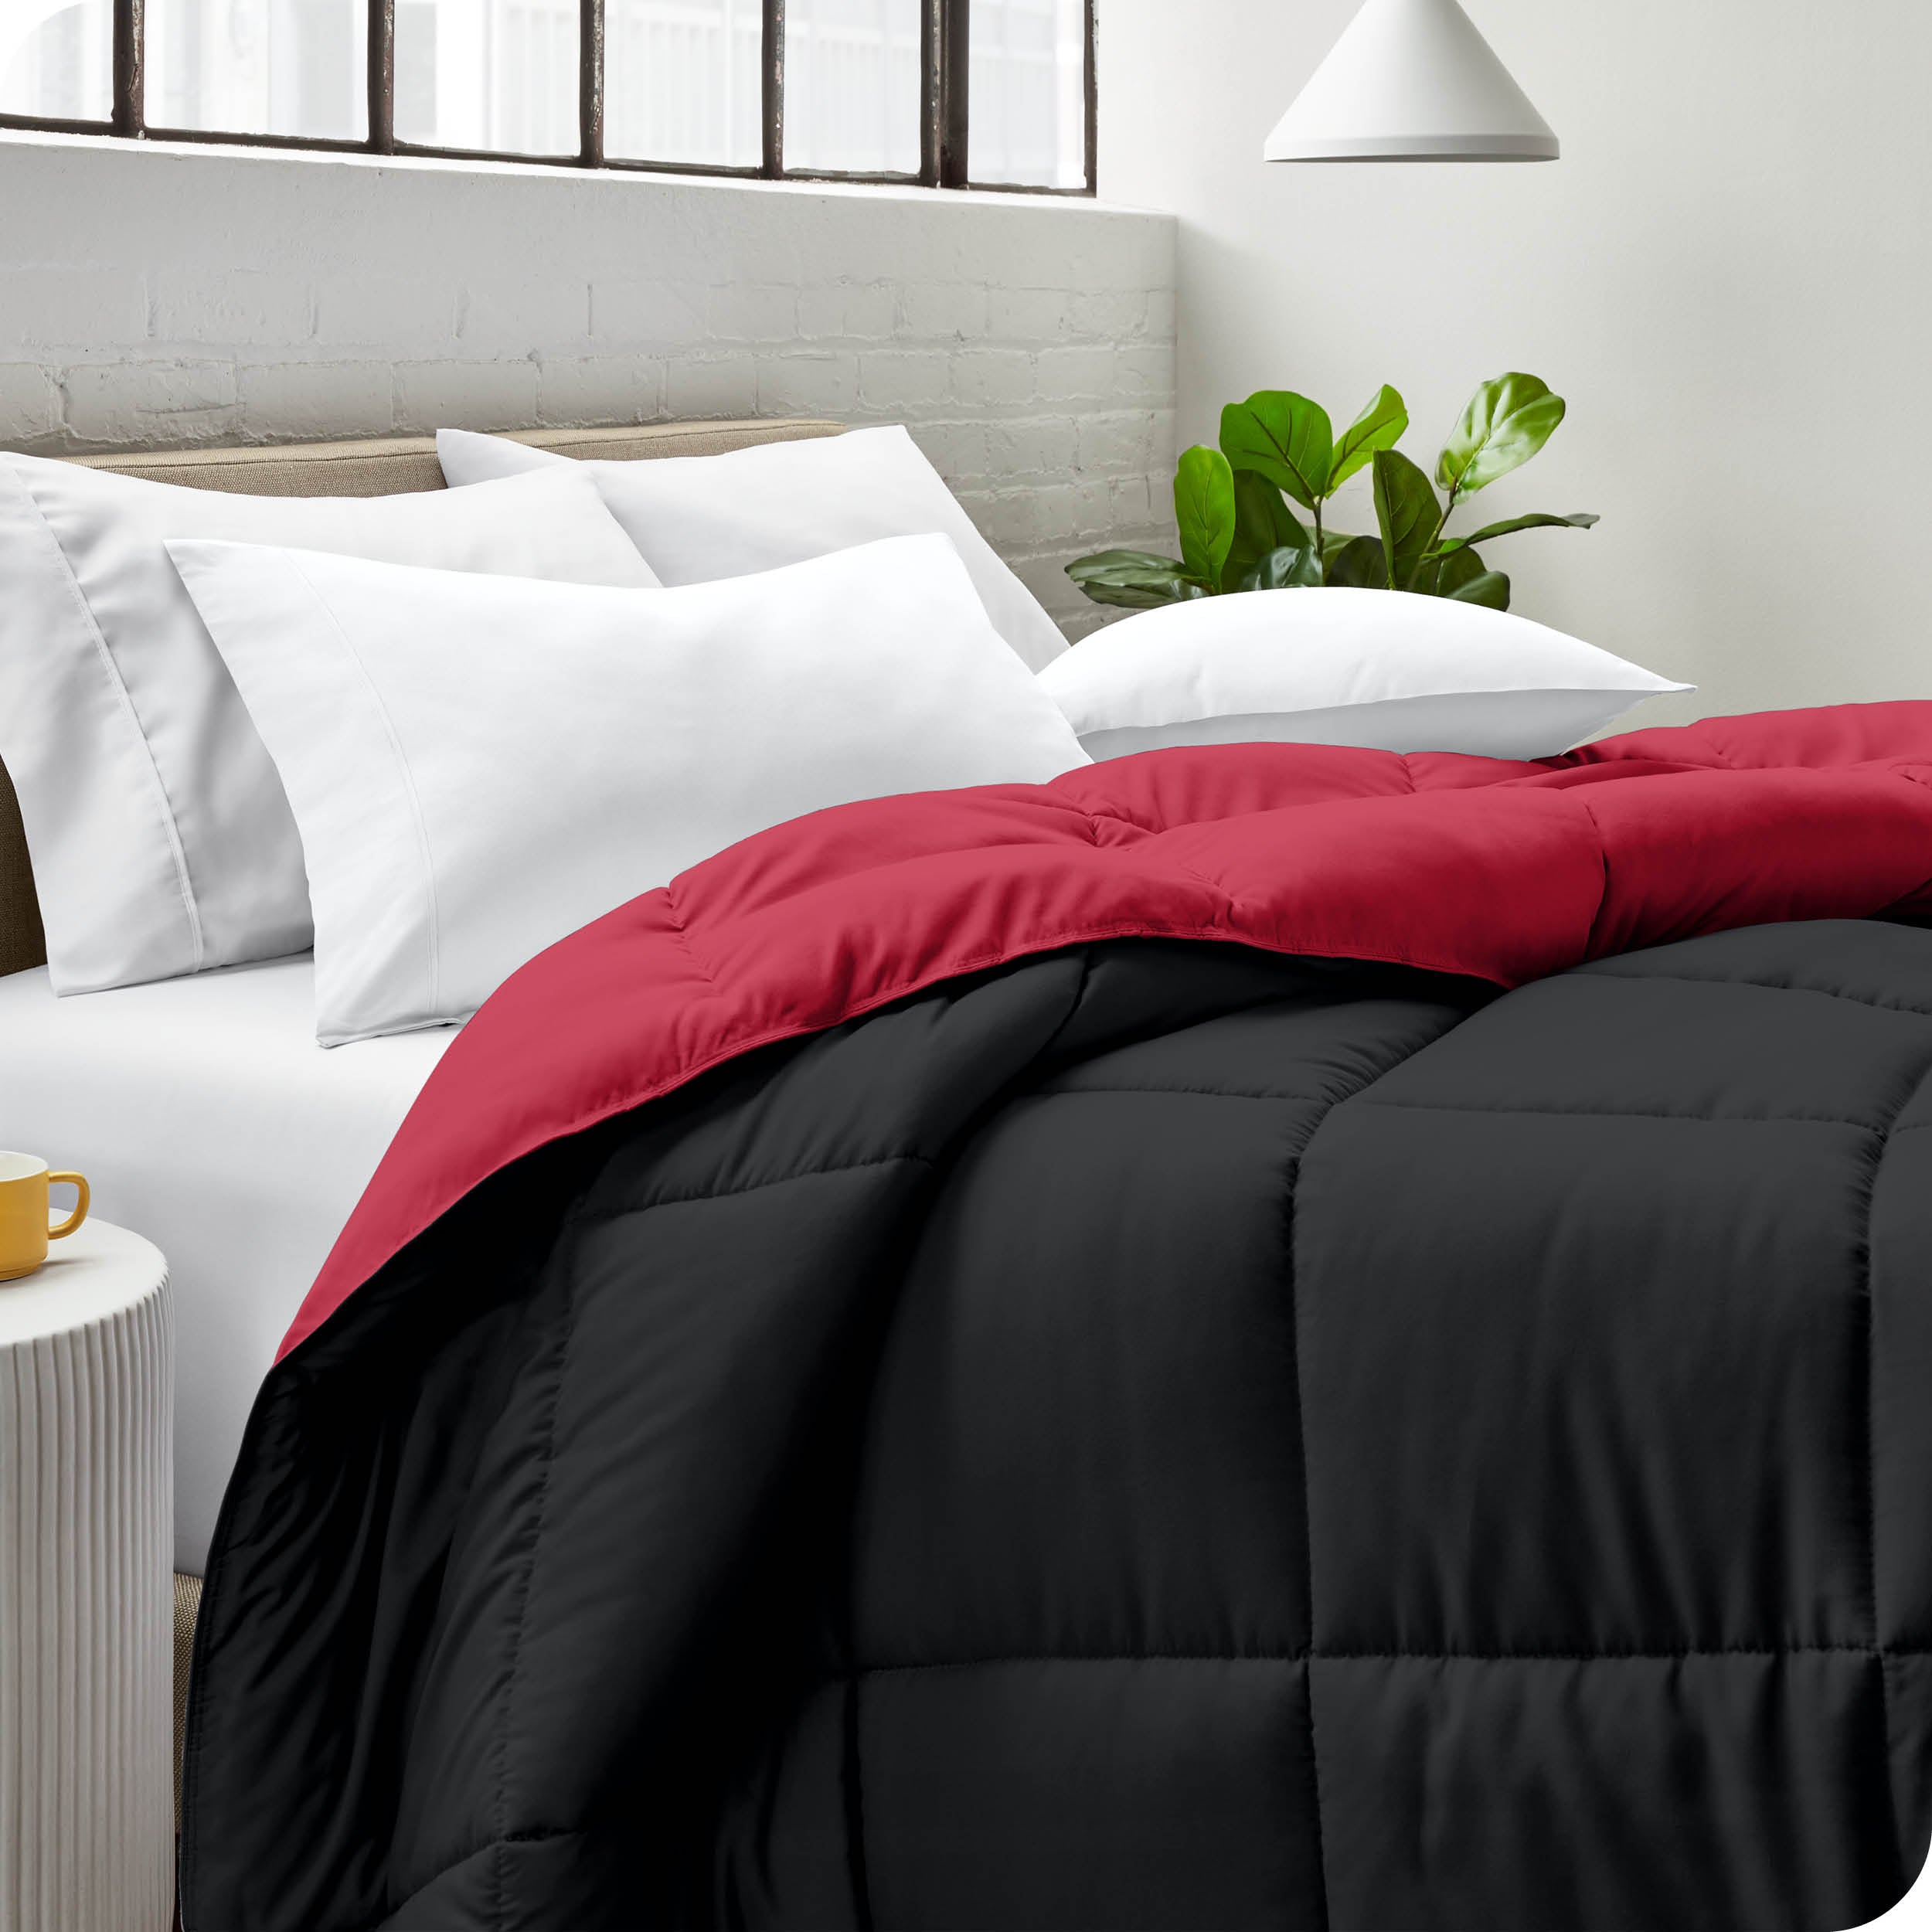 Close up of a comforter on a bed folded over itself. There are also 4 pillows on the bed.